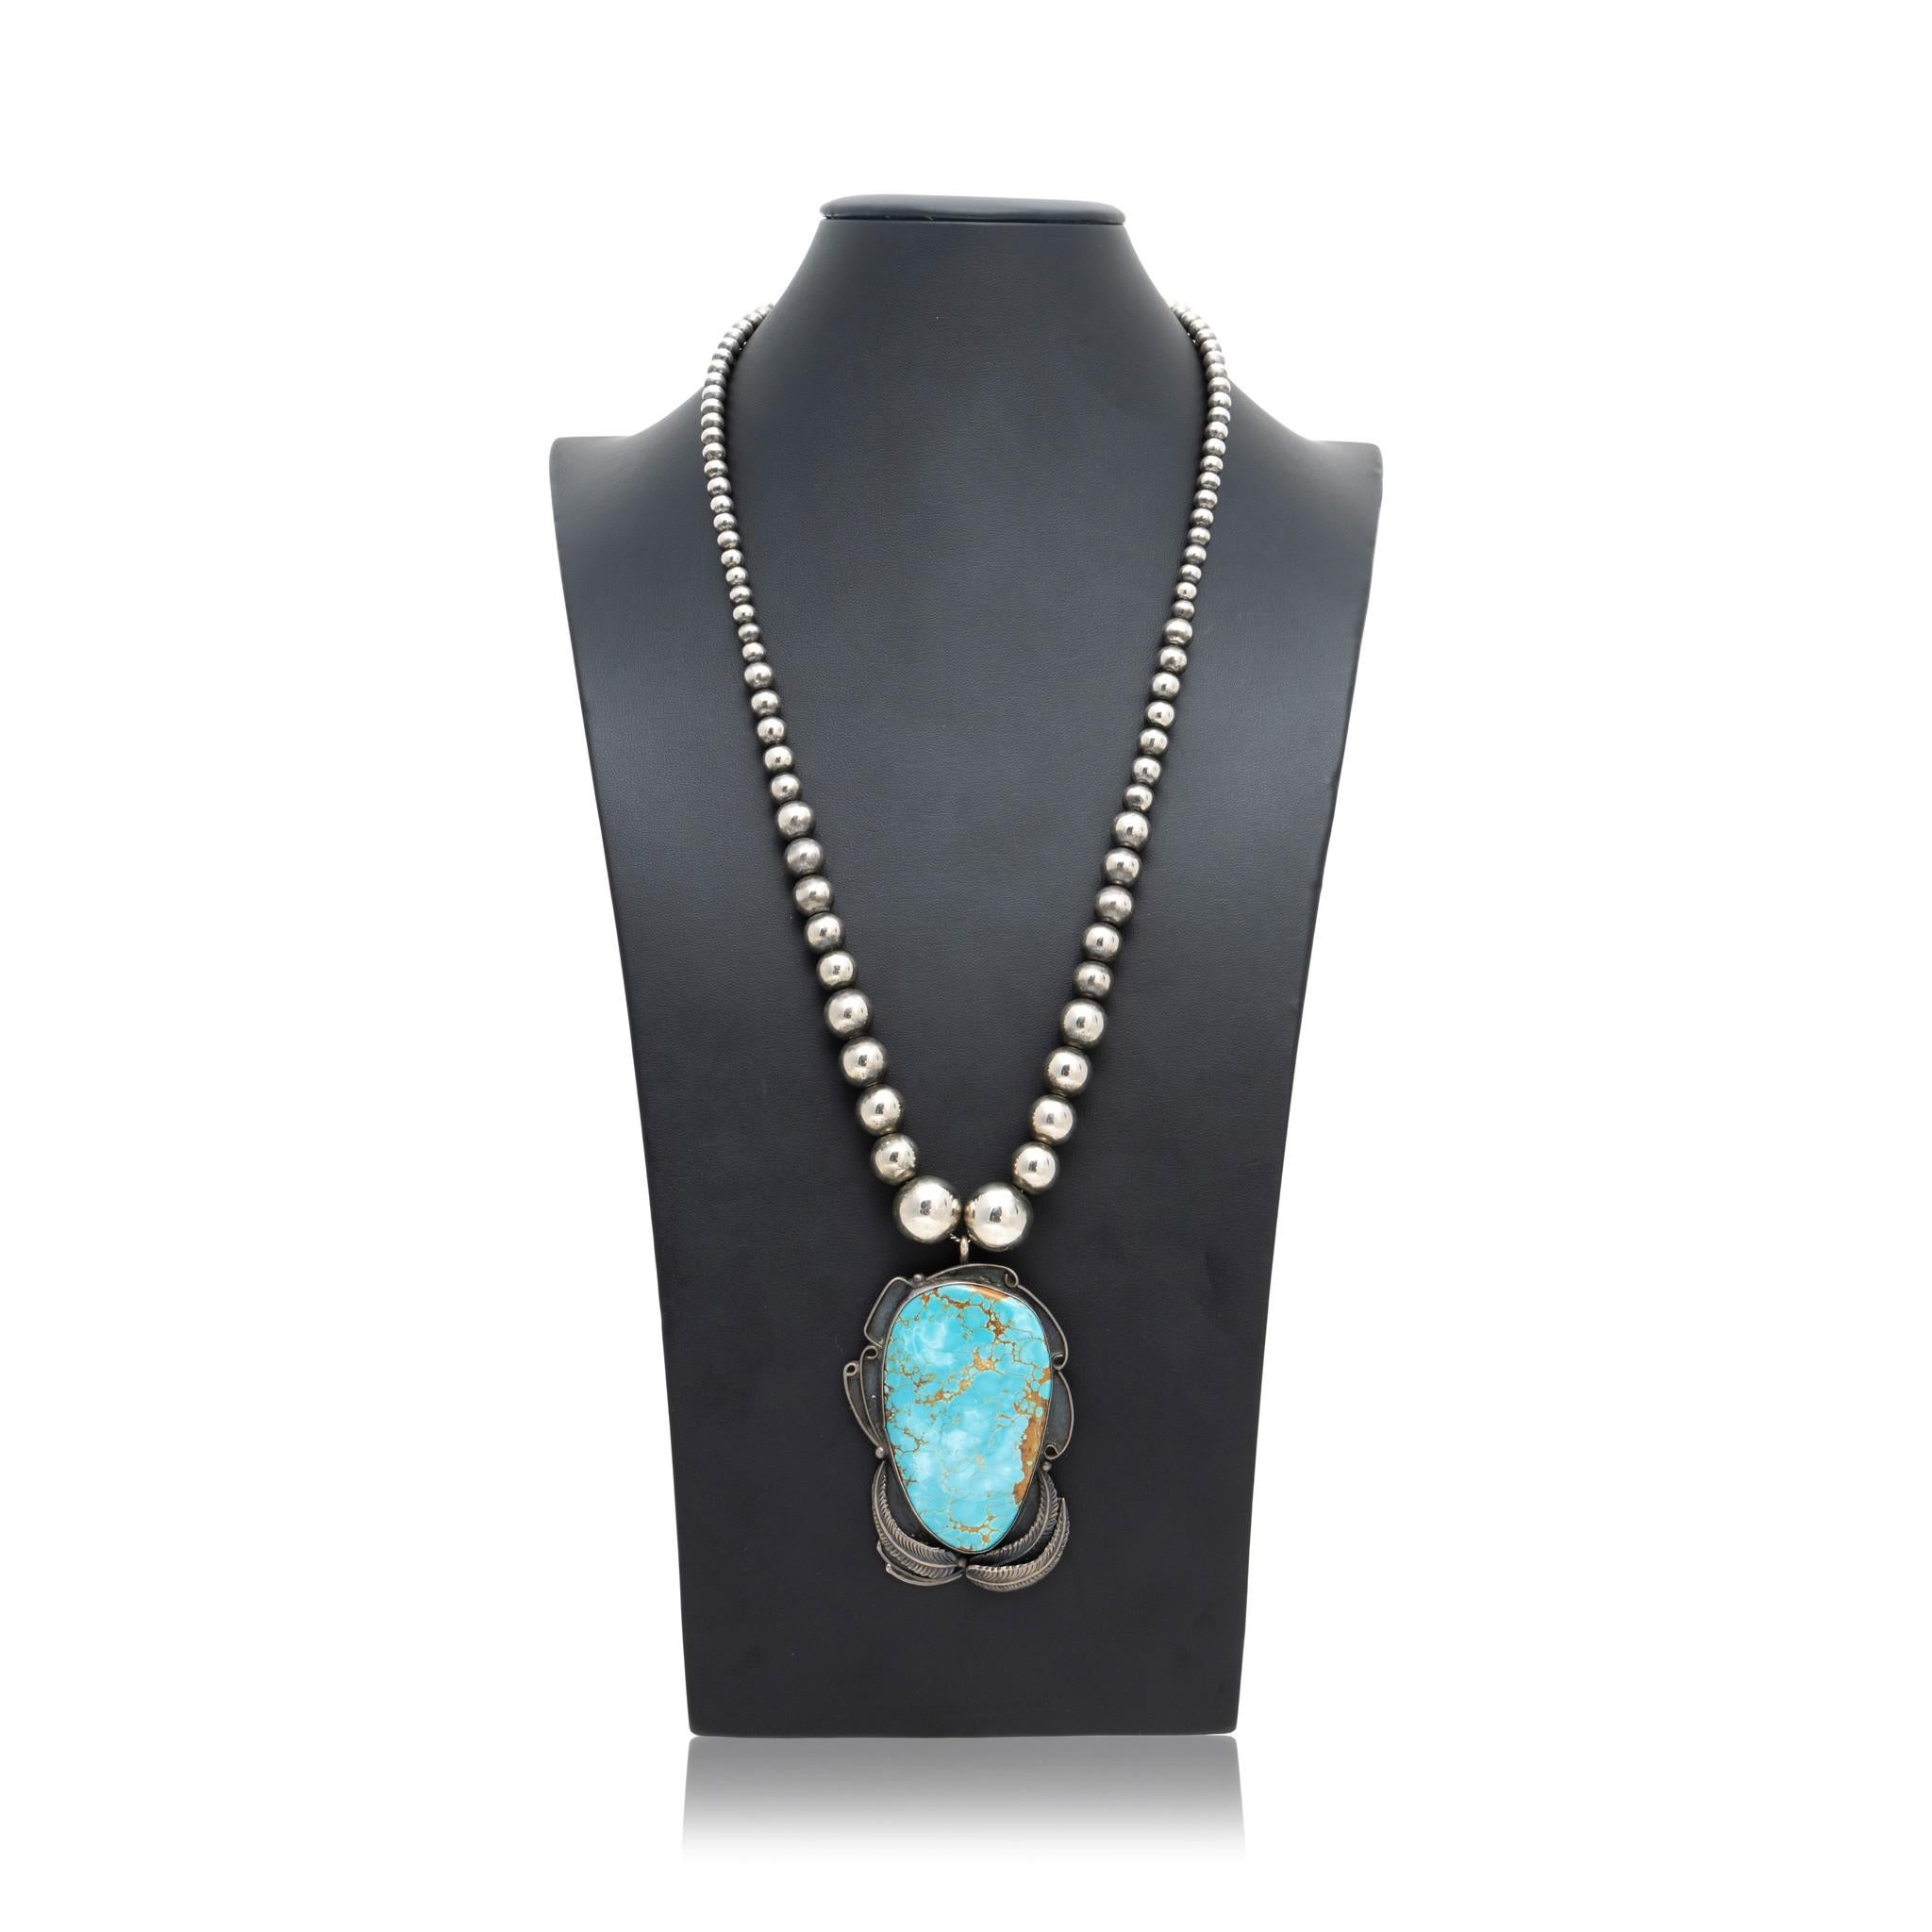 Native American Navajo Indian sterling silver and Blue Diamond turquoise necklace. Graduated Navajo pearl sterling silver chain ending with large turquoise slab set in sterling shadow box with leaf design. Lots of patina that shows age. Great